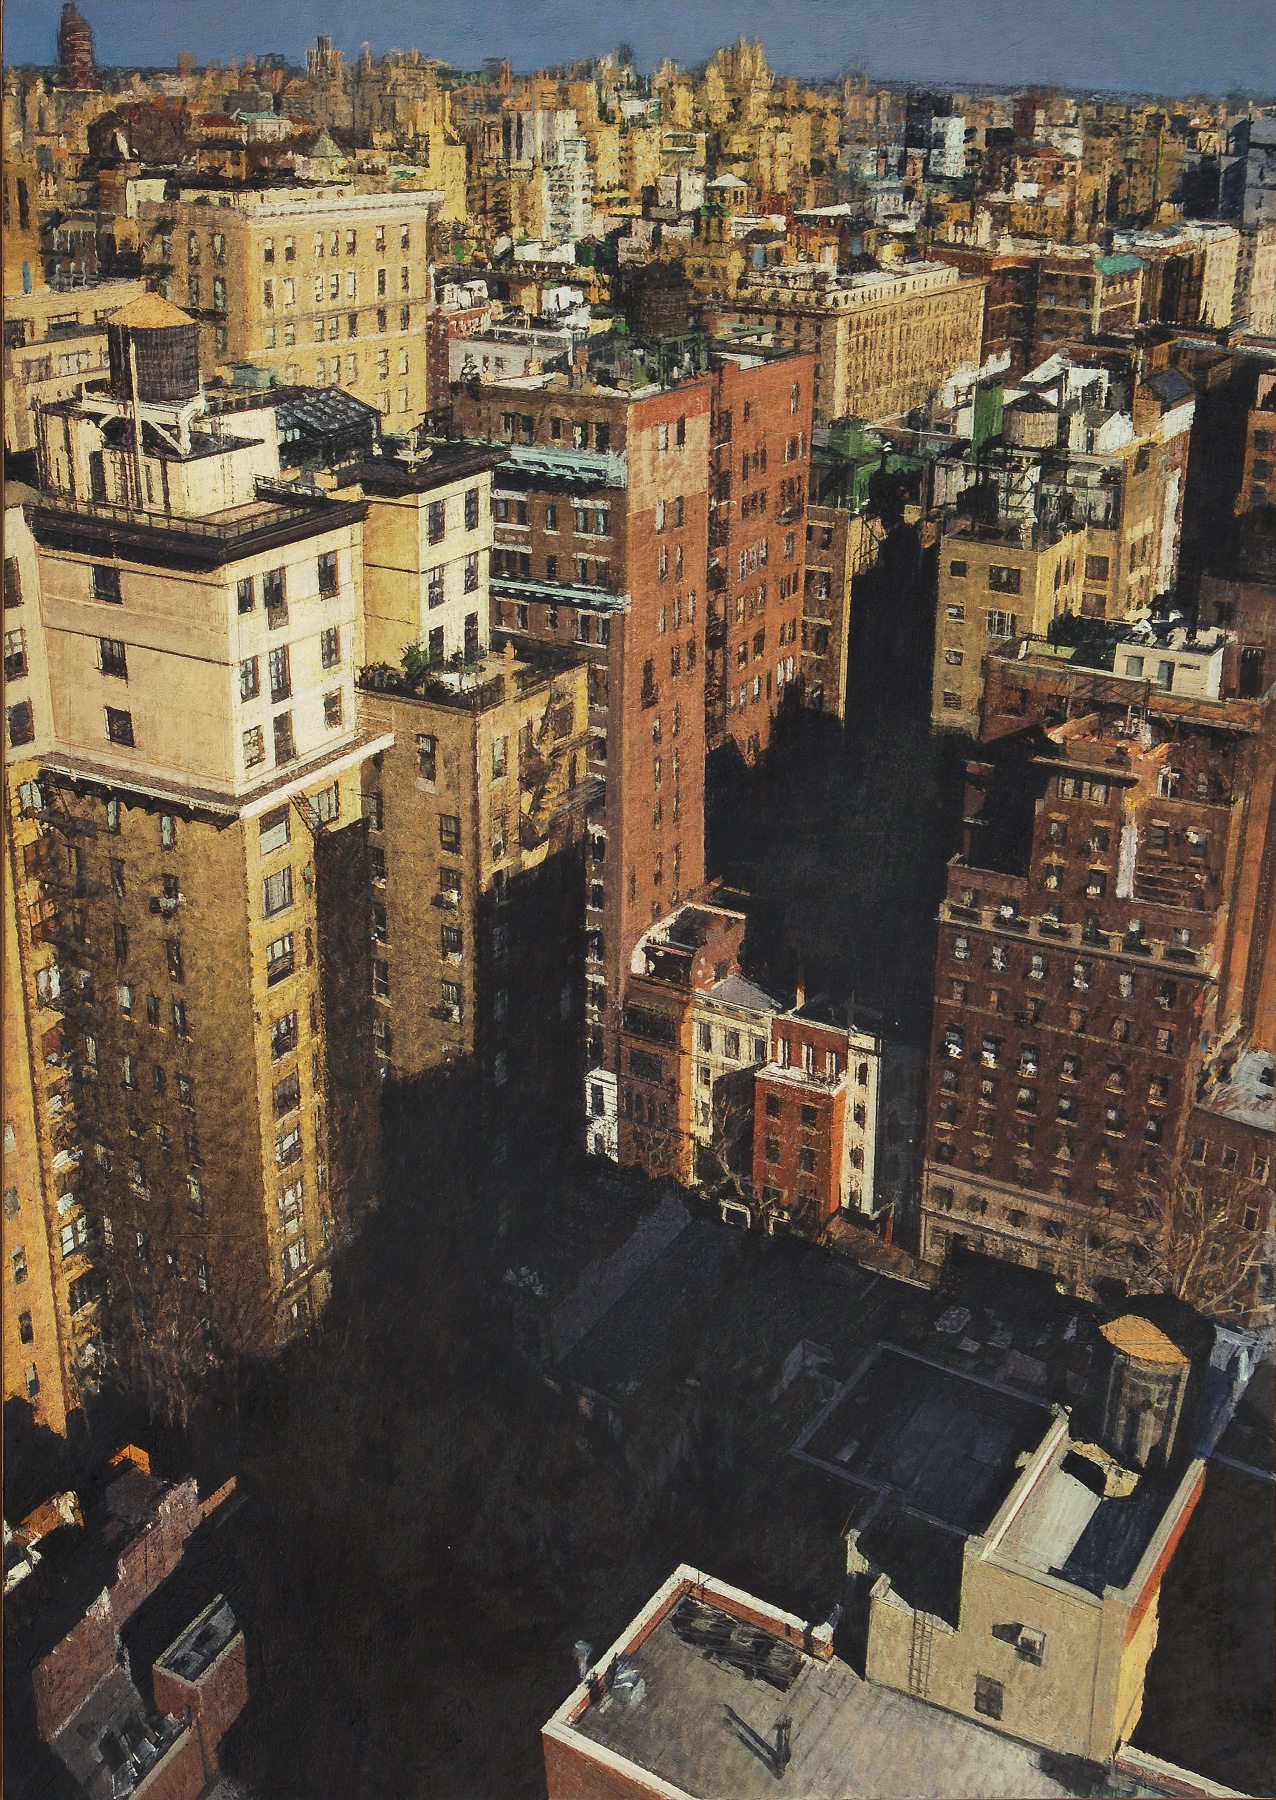 Bernardo Siciliano, Naked City #2 (SOLD), 2009, oil on canvas, 45 1/4 x 31 5/8 inches